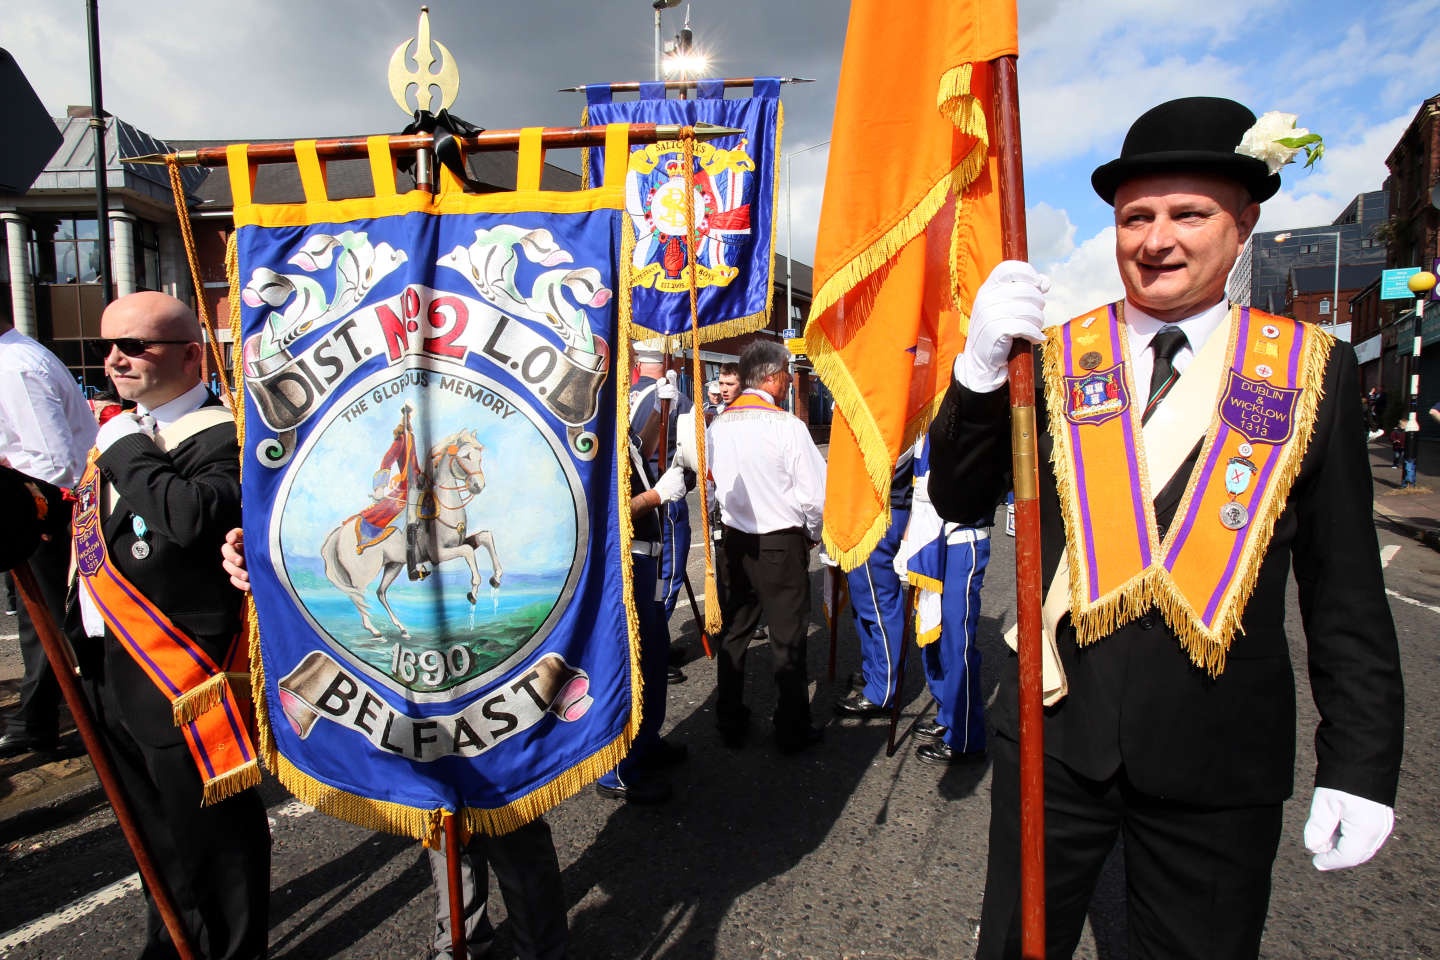 Unionist parades, remnants of Protestant pride in Northern Ireland

